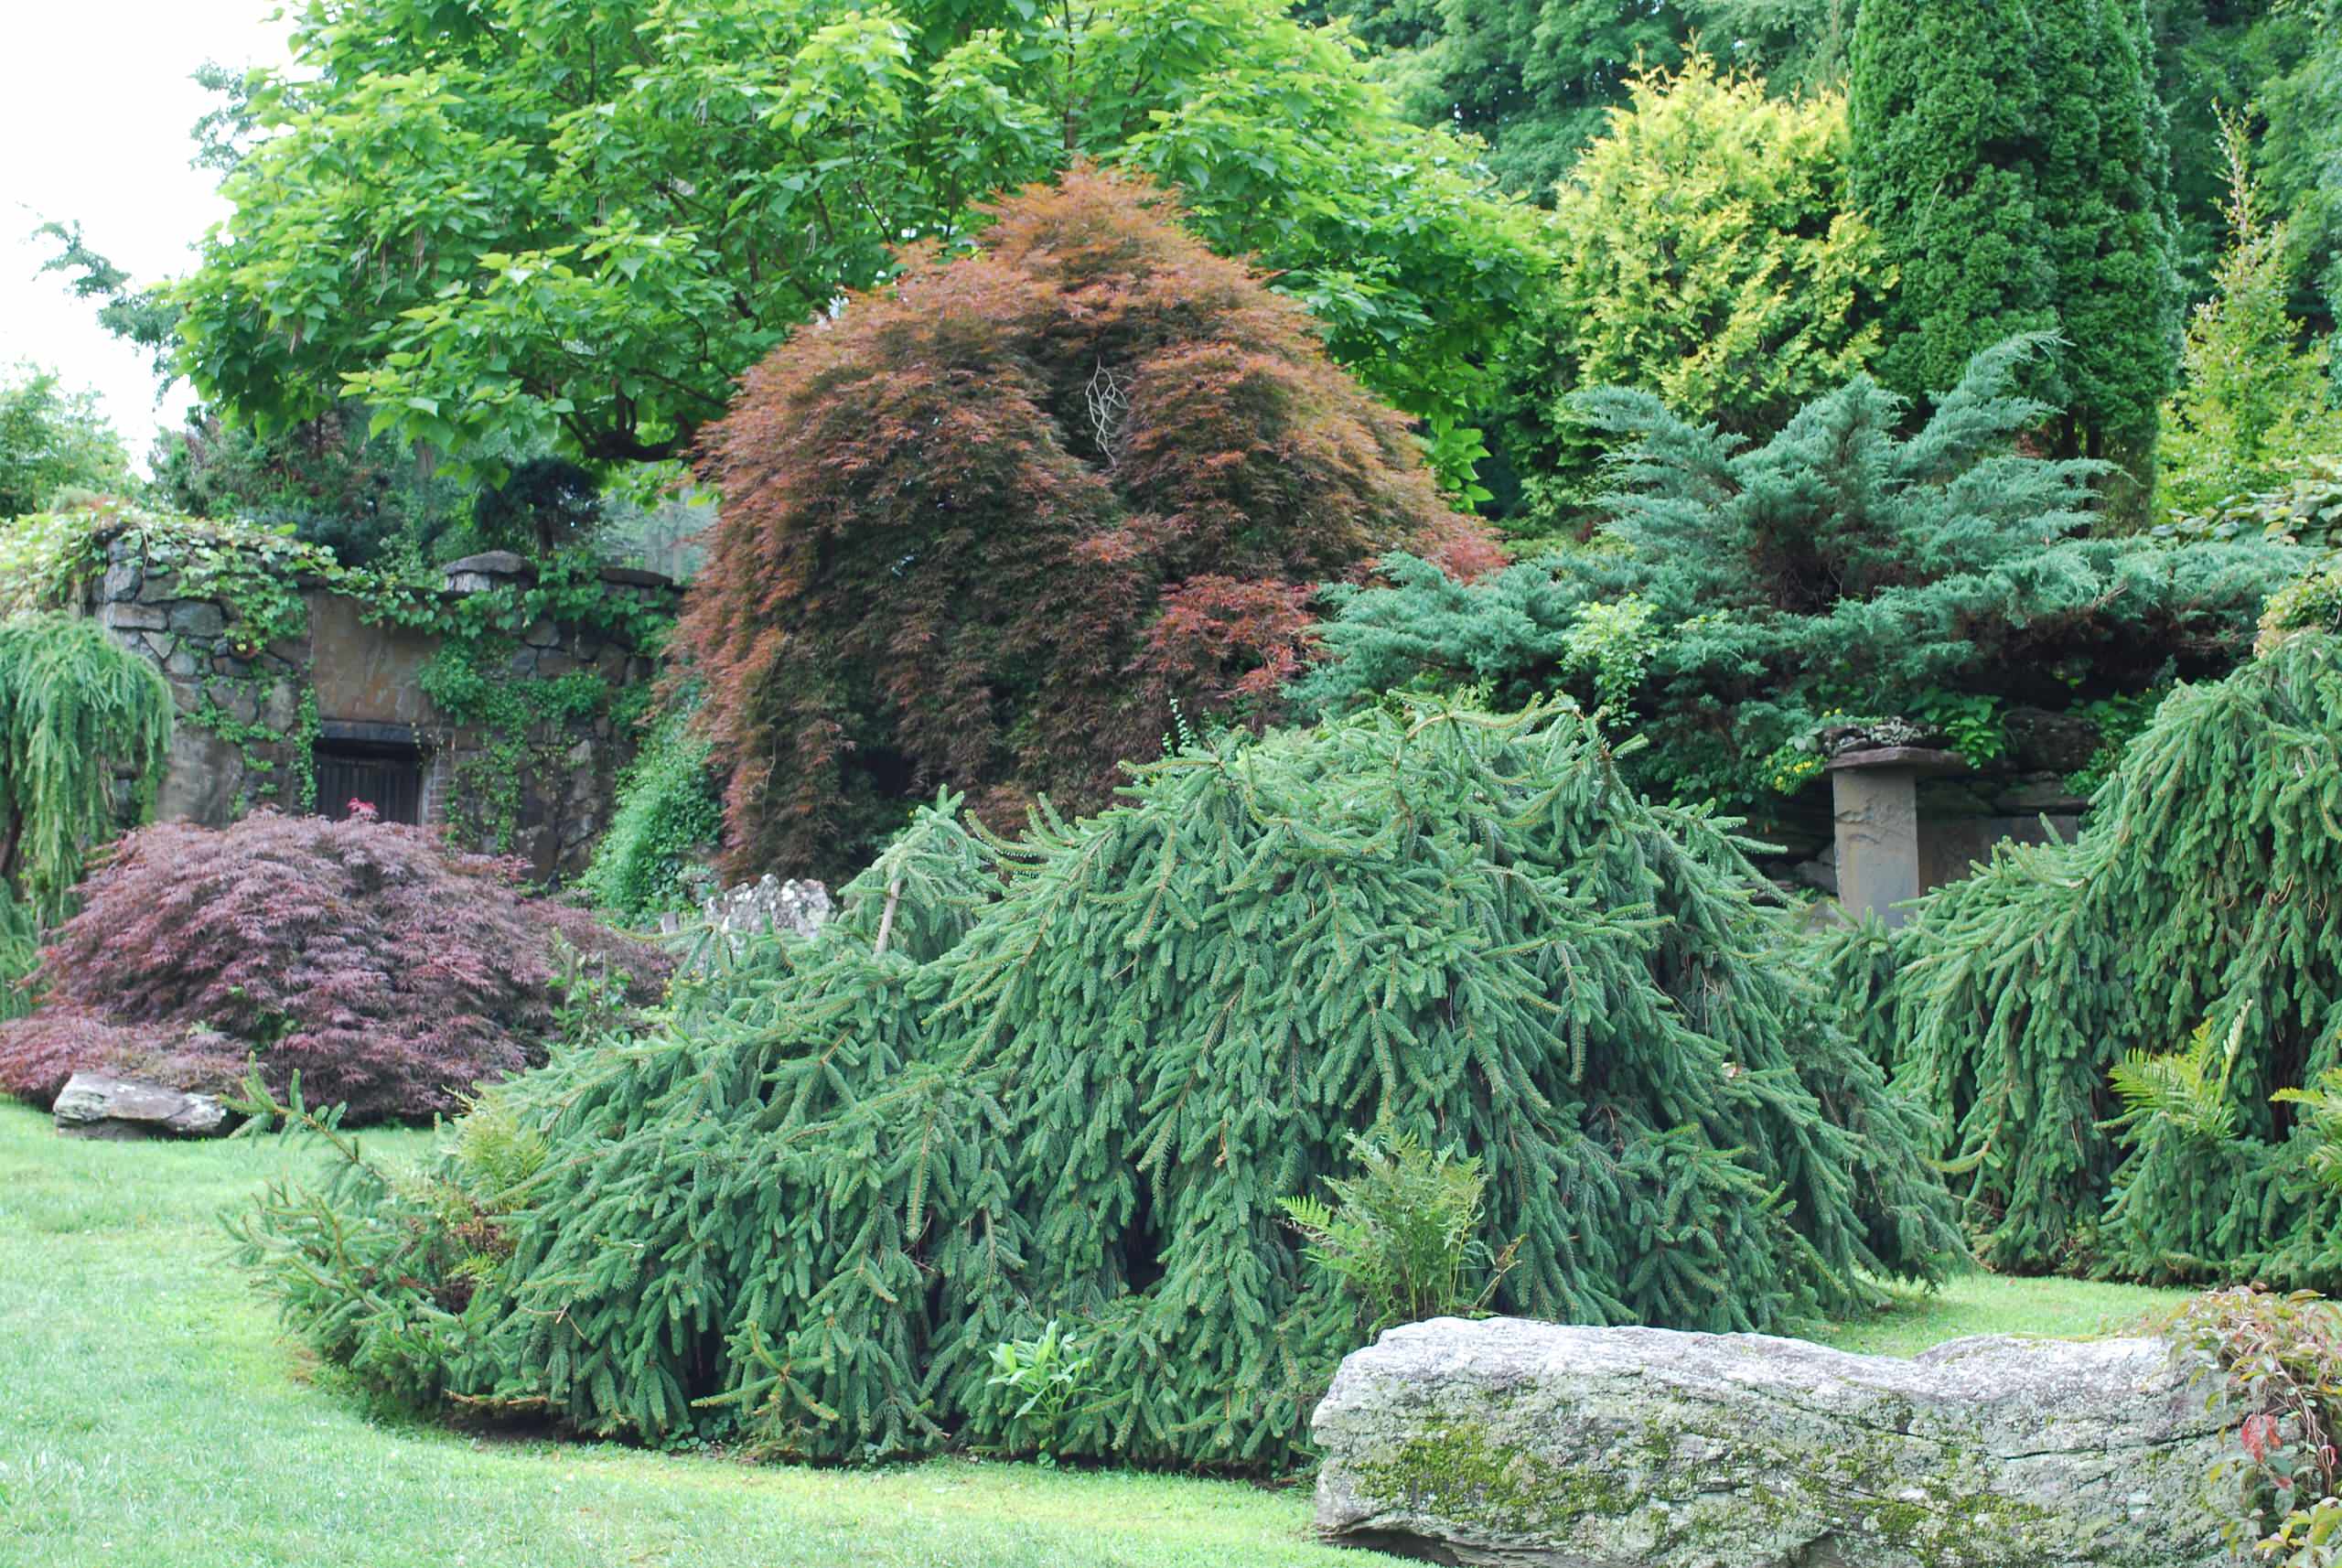 Weeping Norway spruce, maples and junipers at Innisfree.